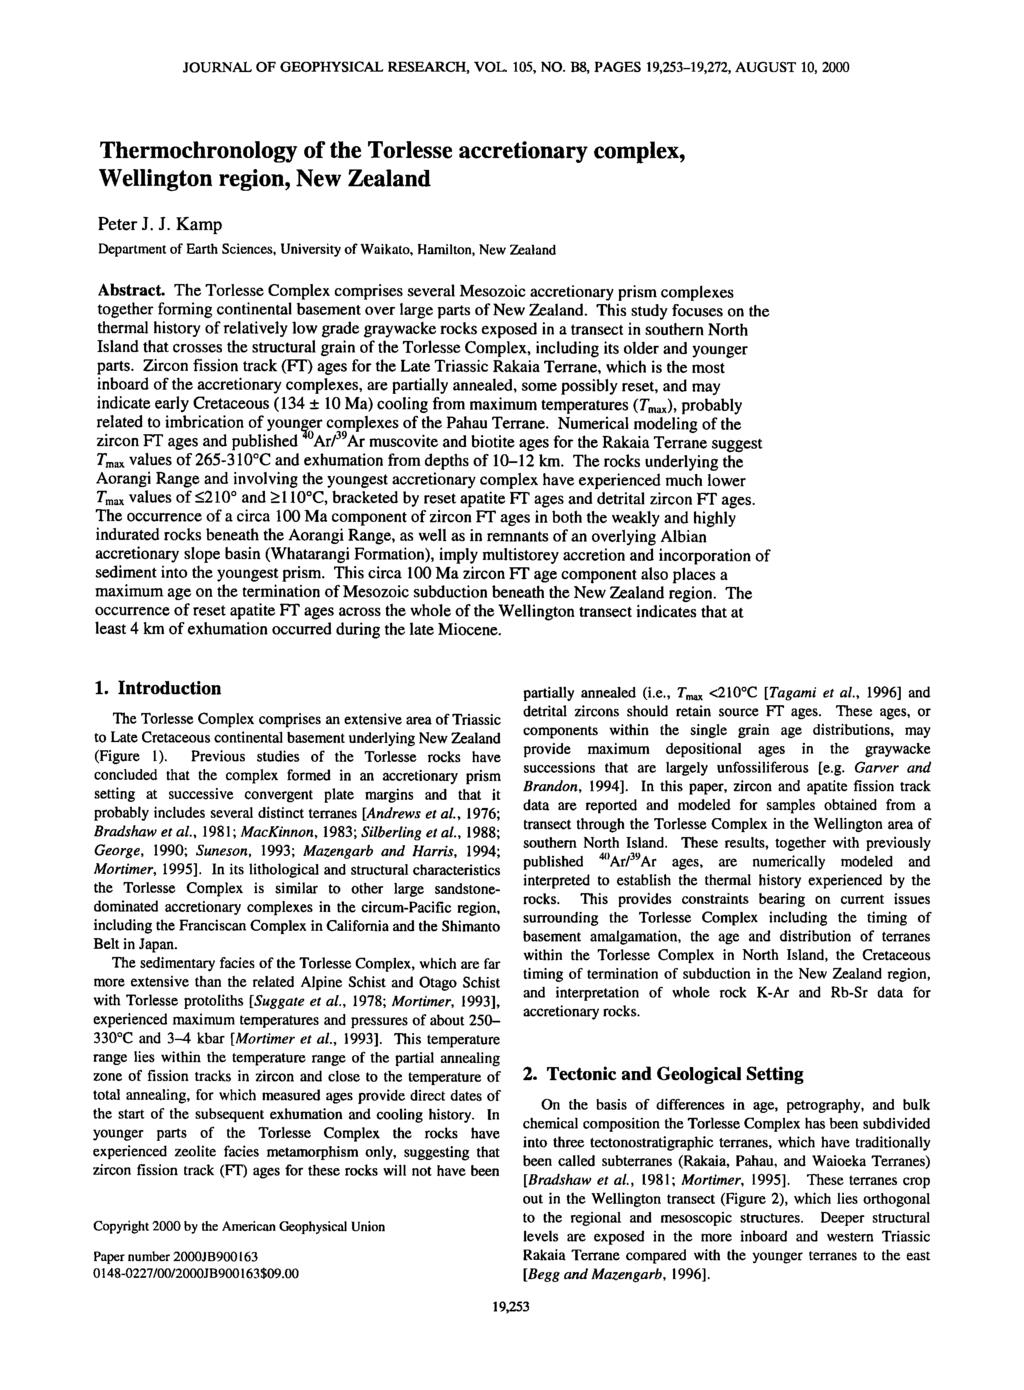 JOURNAL OF GEOPHYSICAL RESEARCH, VOL. 105, NO. B8, PAGES 19,253-19,272, AUGUST 10, 2000 Thermochronology of the Torlesse accretionary complex, Wellington region, New Zealand Peter J.